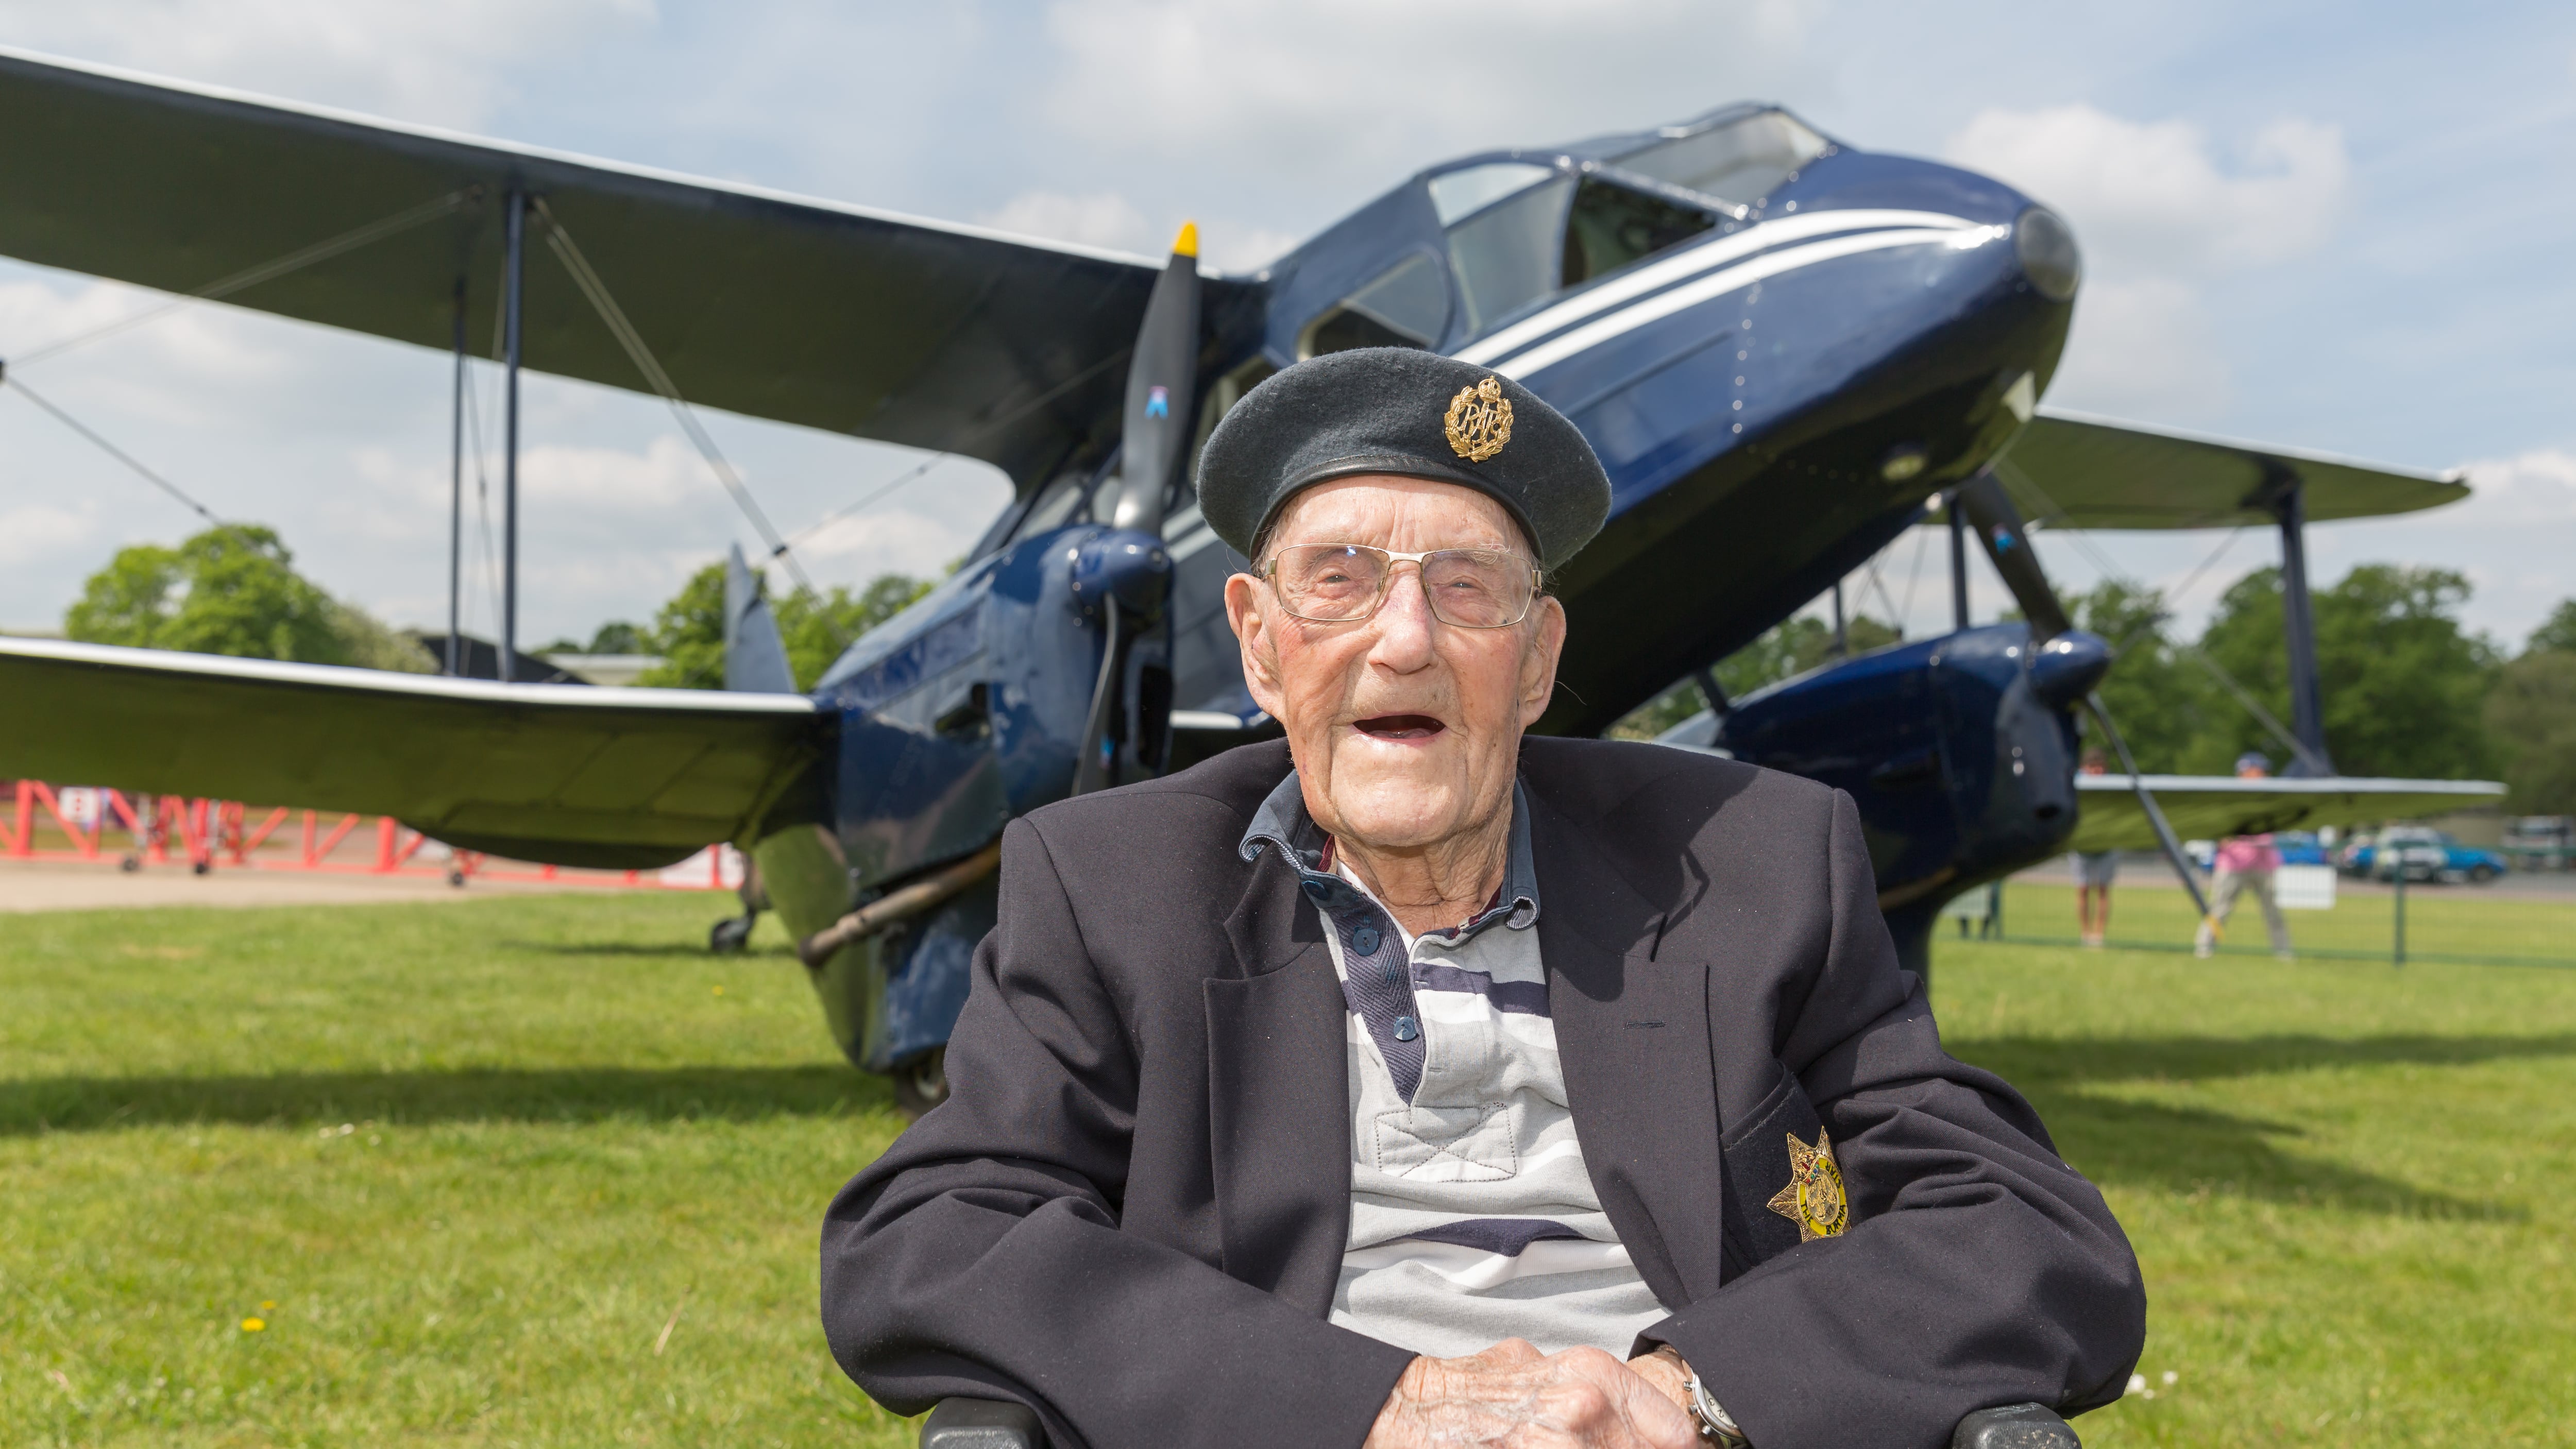 Second World War veteran Arthur Clark’s care home surprised him with a flight in a 1930s plane